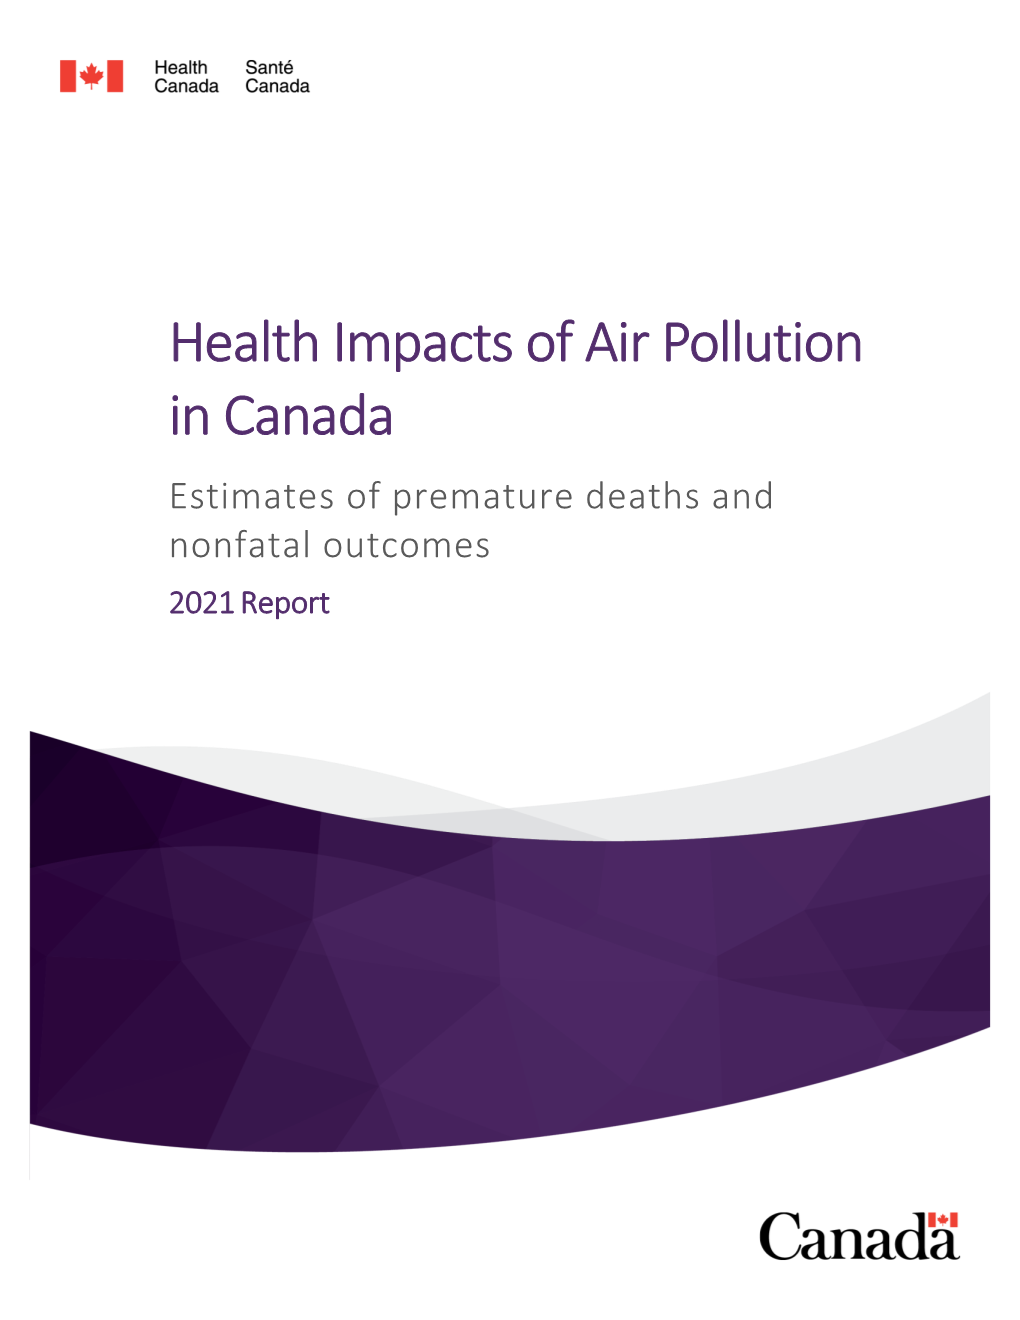 Health Impacts of Air Pollution in Canada Estimates of Premature Deaths and Nonfatal Outcomes